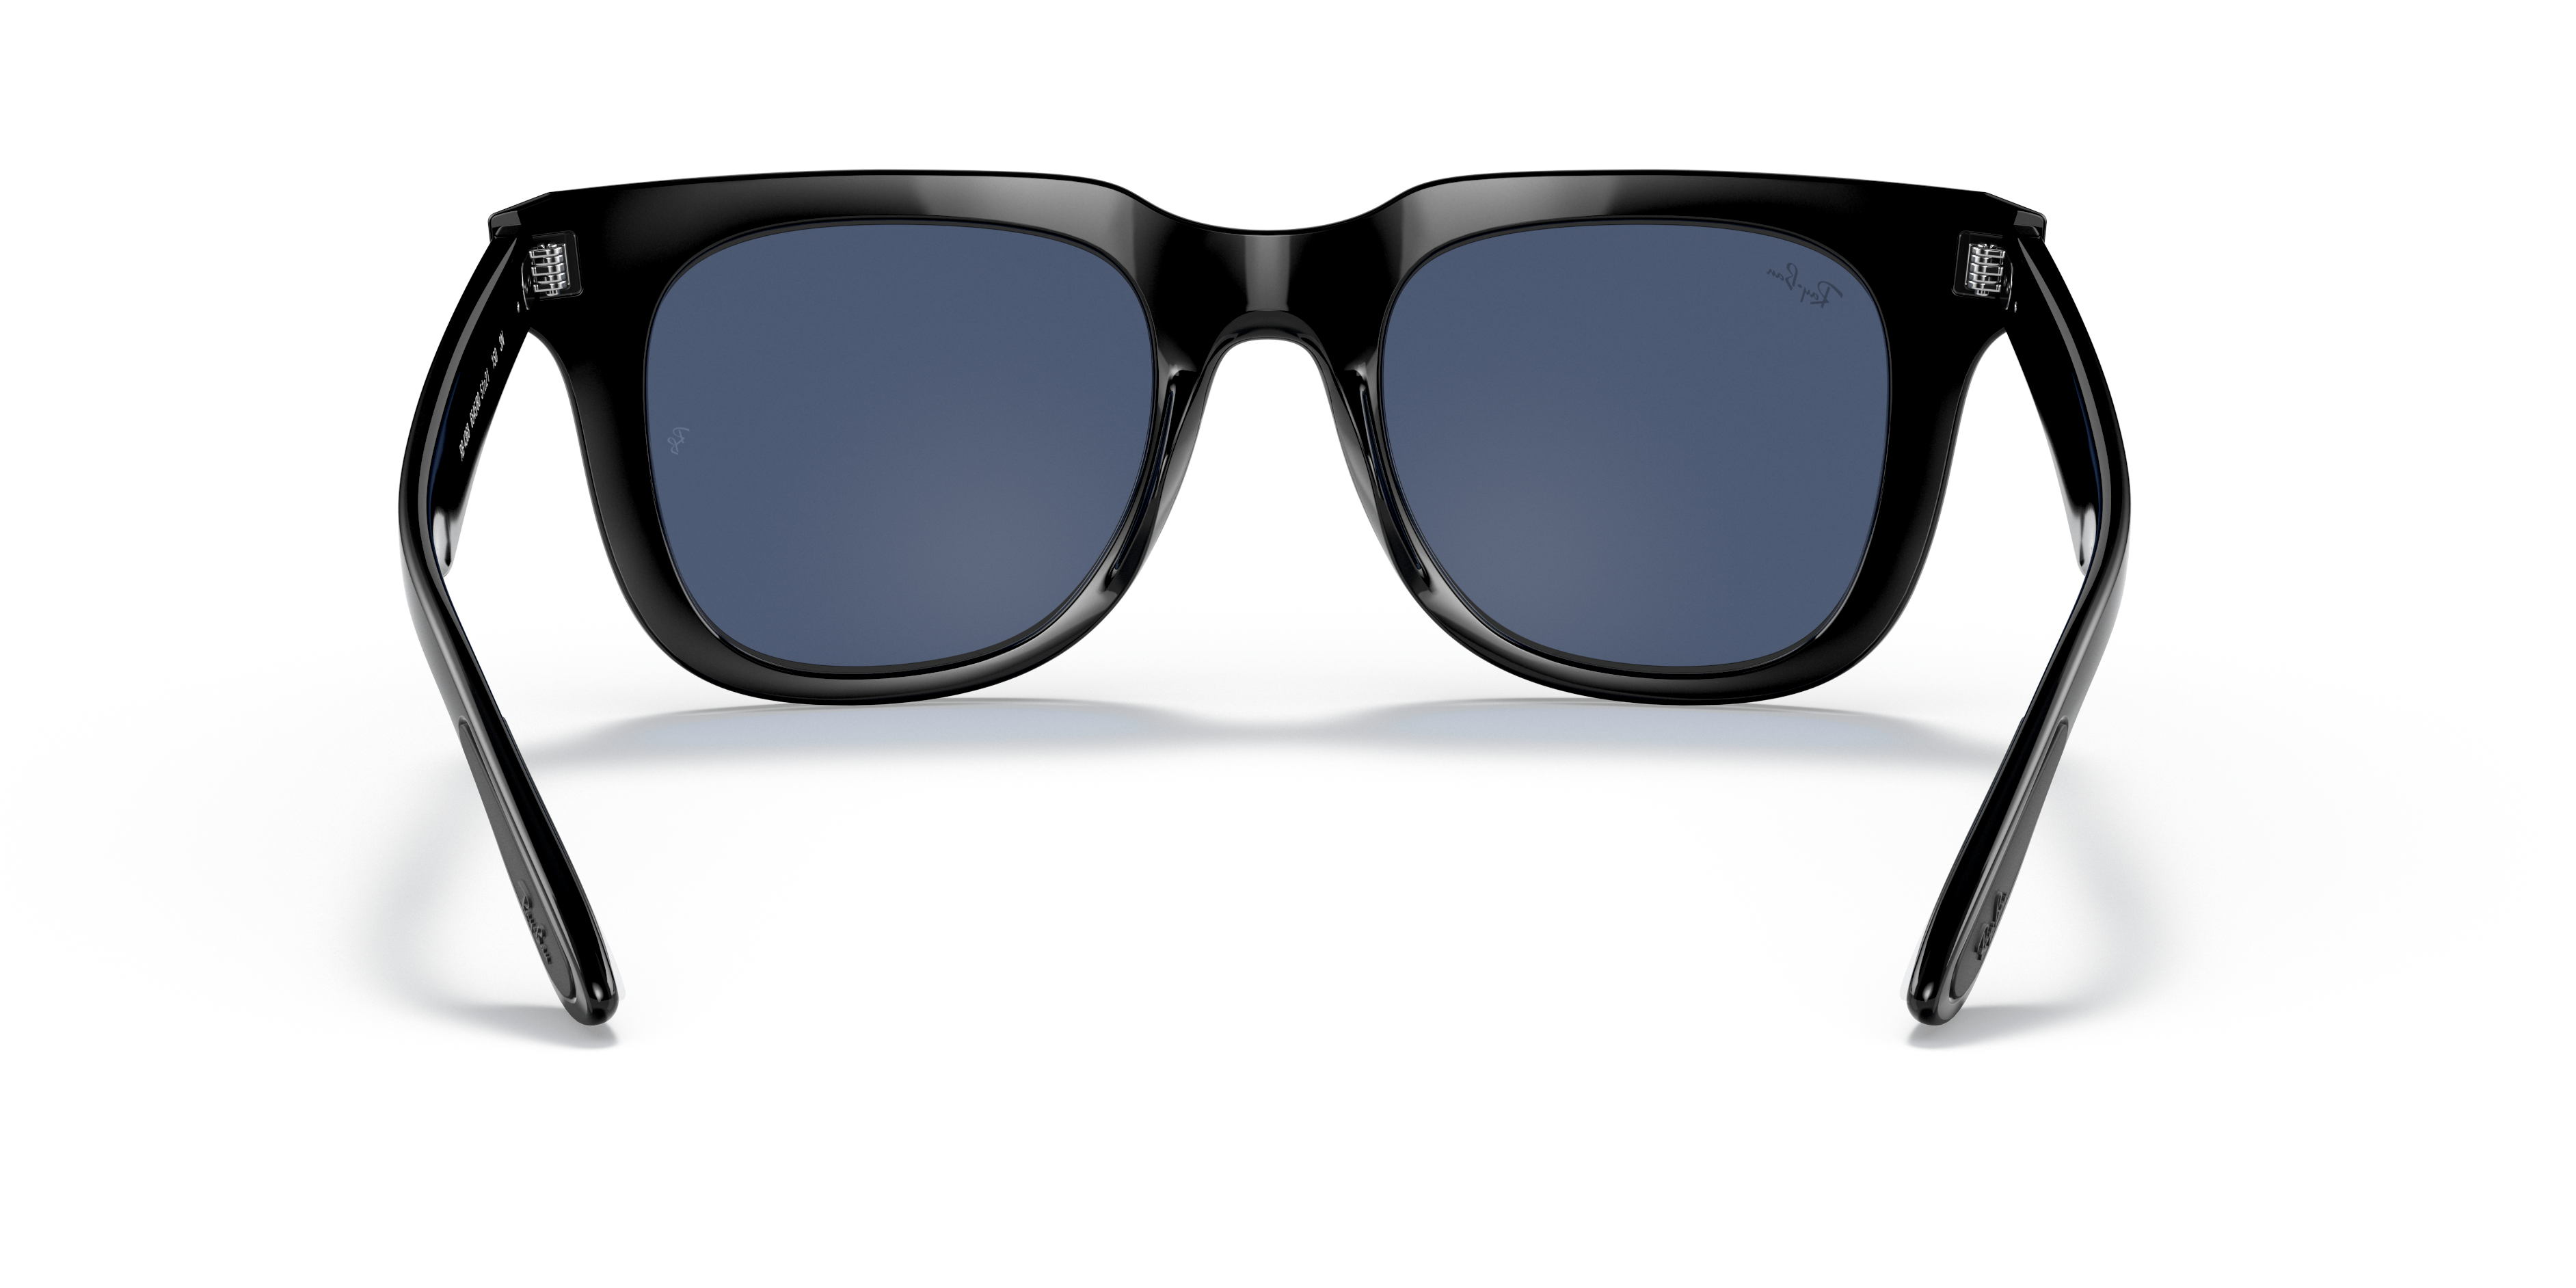 Rb4368 Sunglasses in Black and Dark Blue | Ray-Ban®